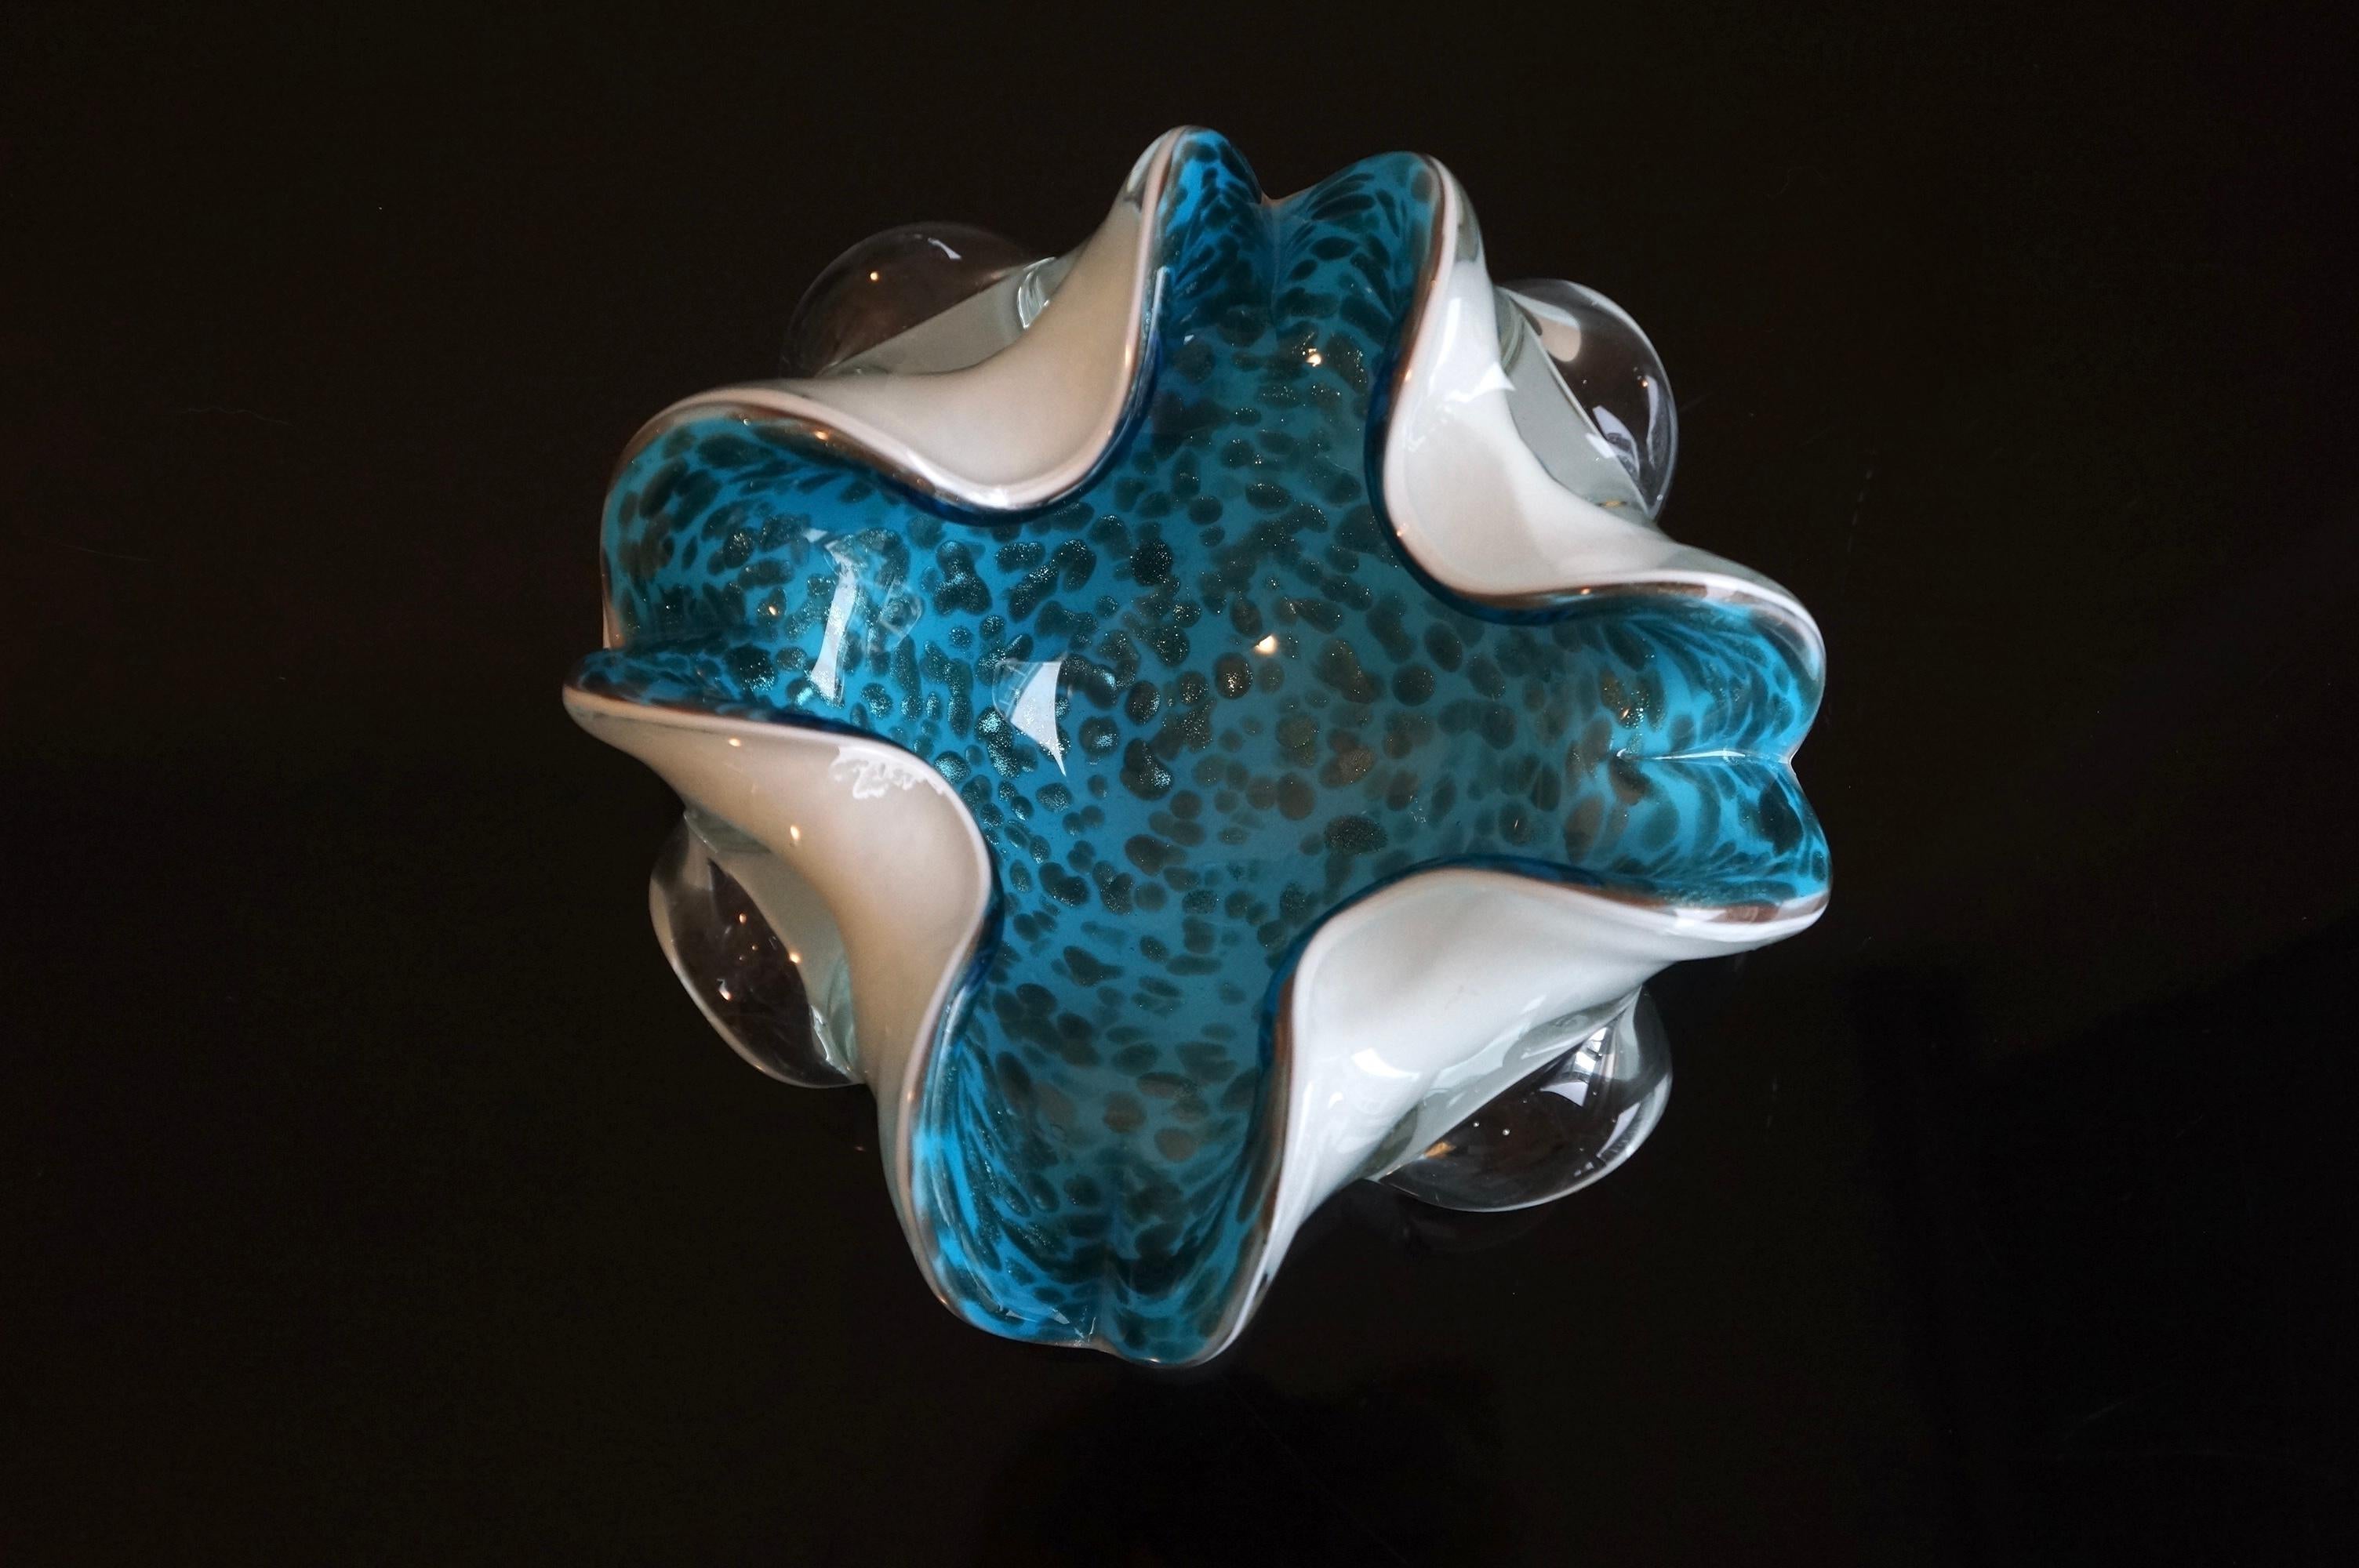 Stunning decorative dish in white, blue, and gold speckled. This bowl is made with a white base, blue layered art glass with aventurine speckles in gold tone. The outside is a white opaline glass colour while the inside features  blue  with gold